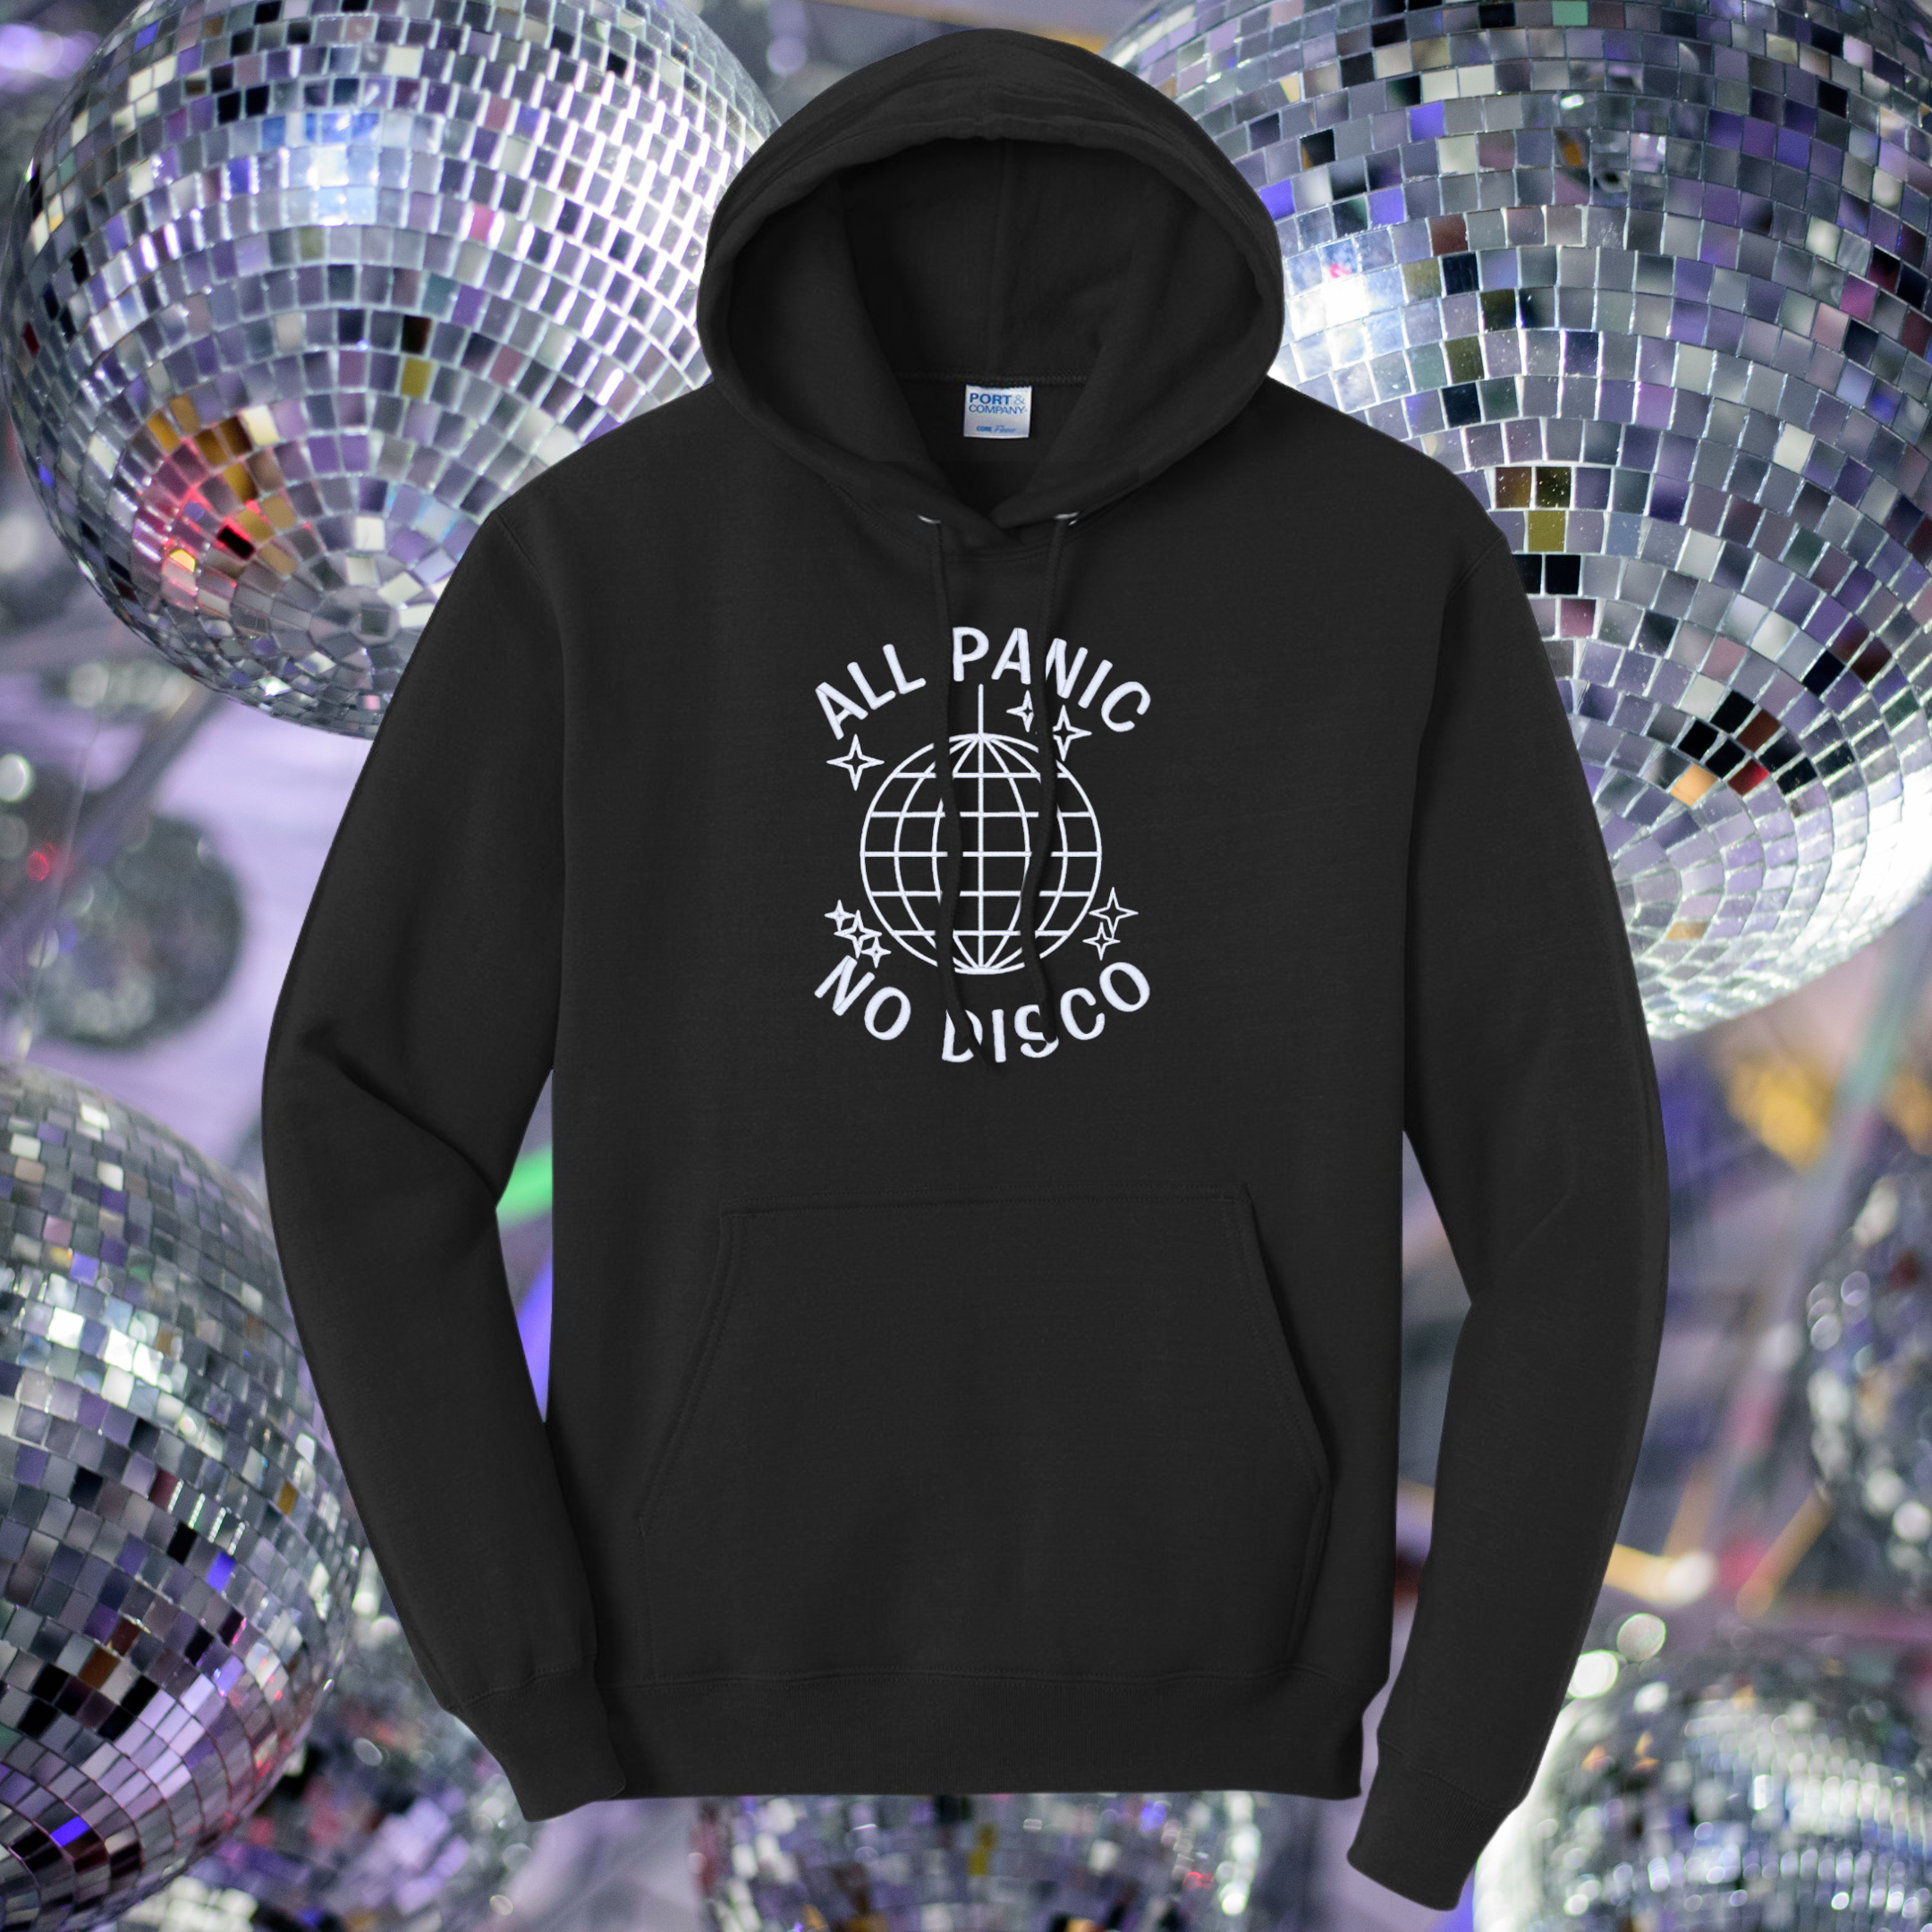 All Panic No Disco Embroidered Black Hoodie, Unisex